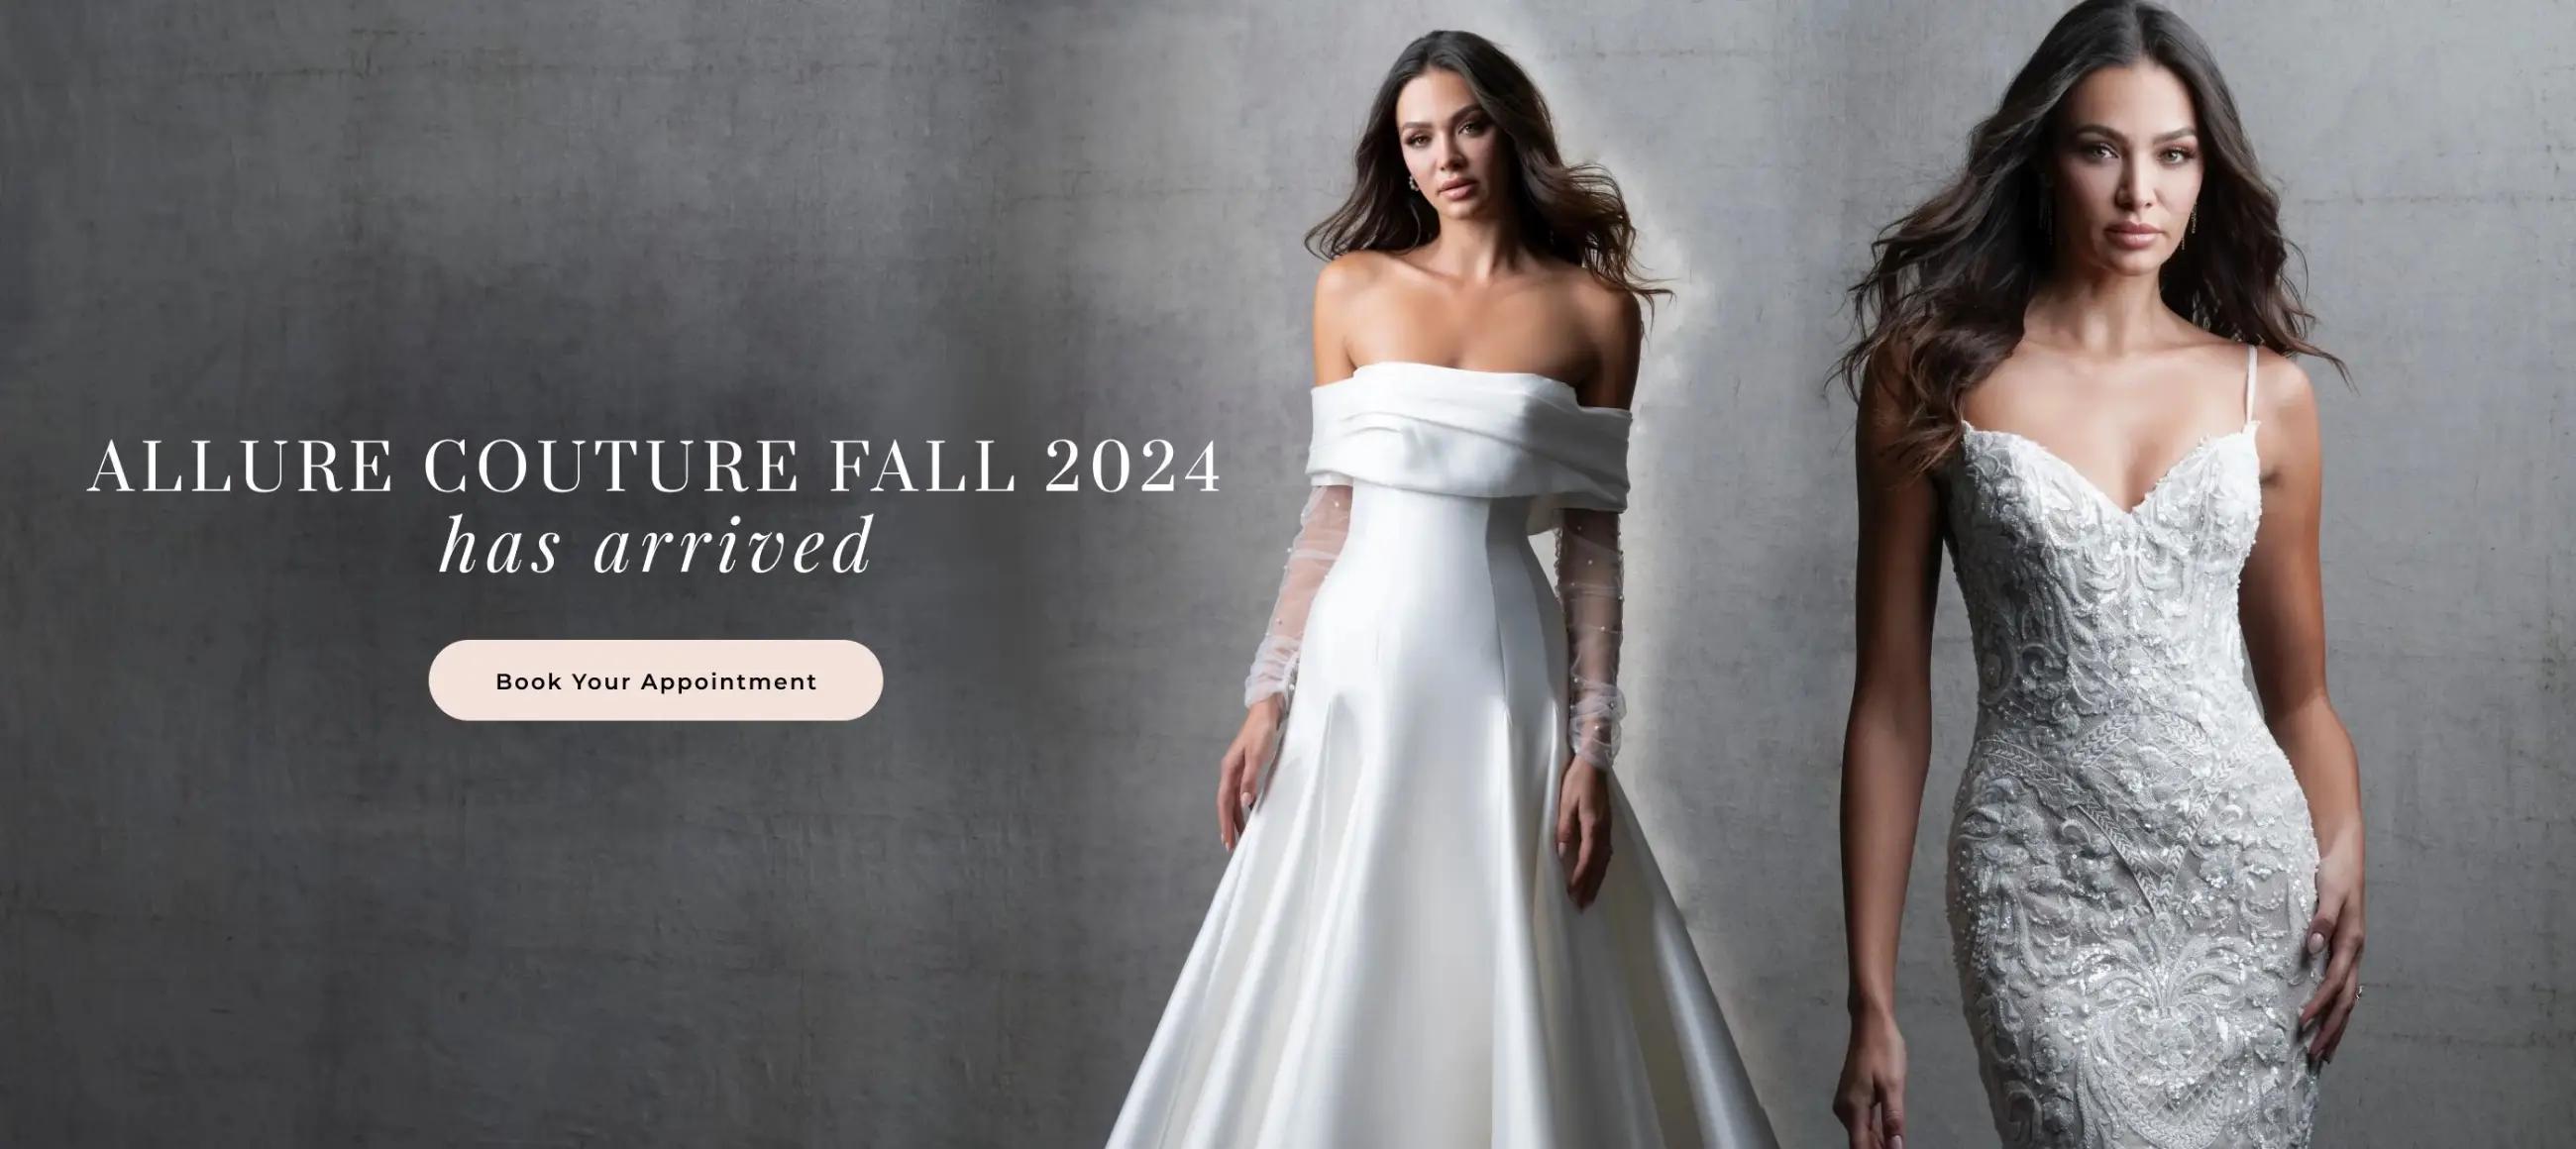 Allure Couture Fall 2024 Banner